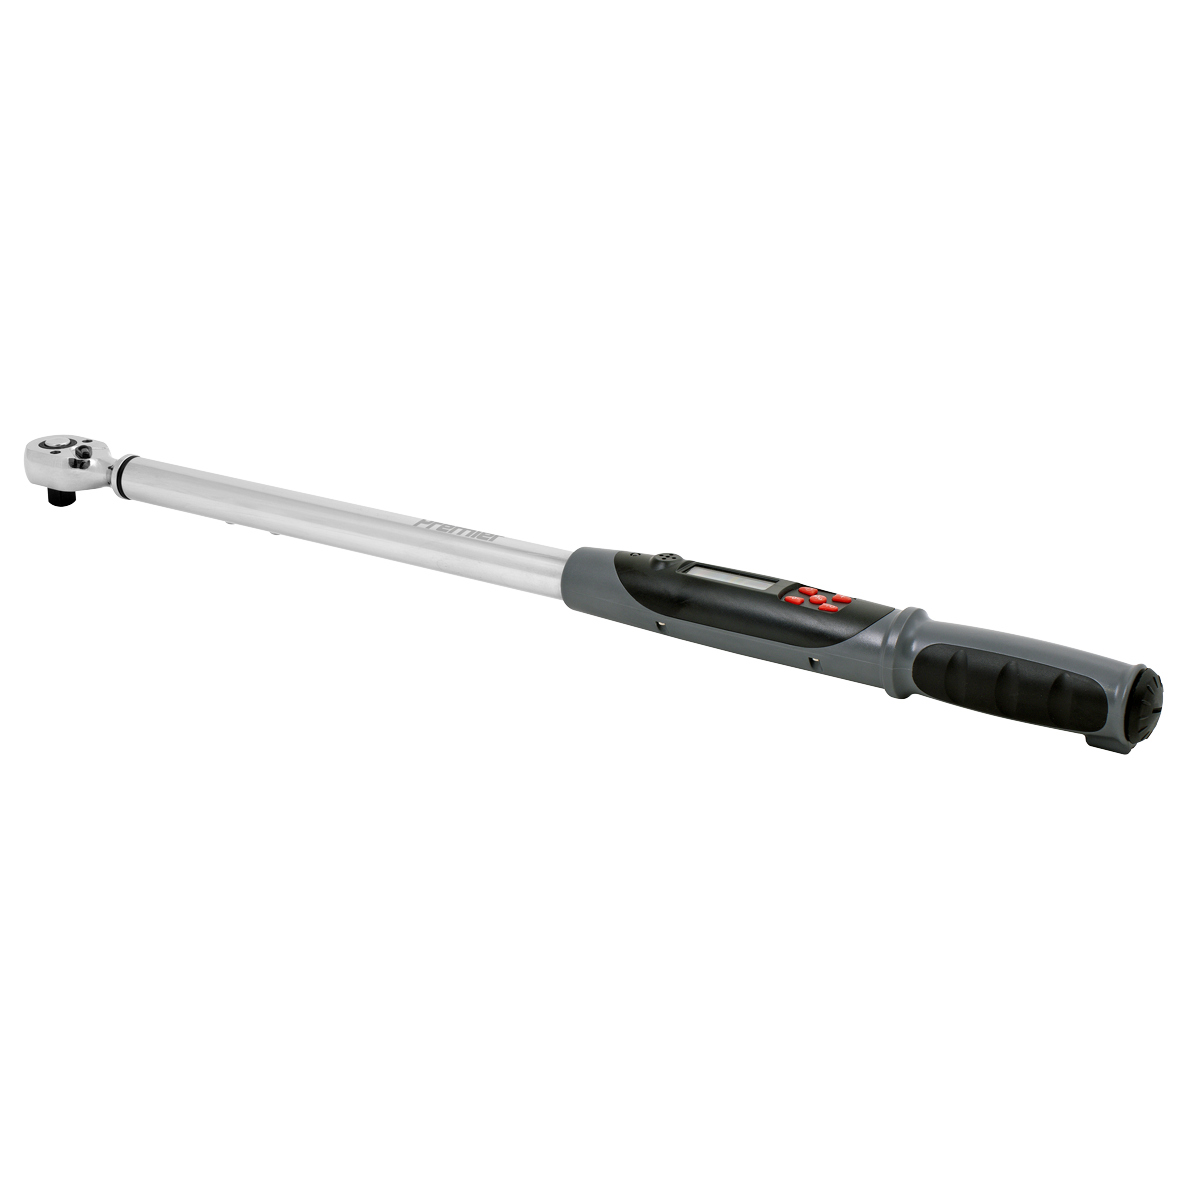 Sealey Angle Torque Wrench Digital 1/2"Sq Drive 30-340Nm (22-250lb.ft)